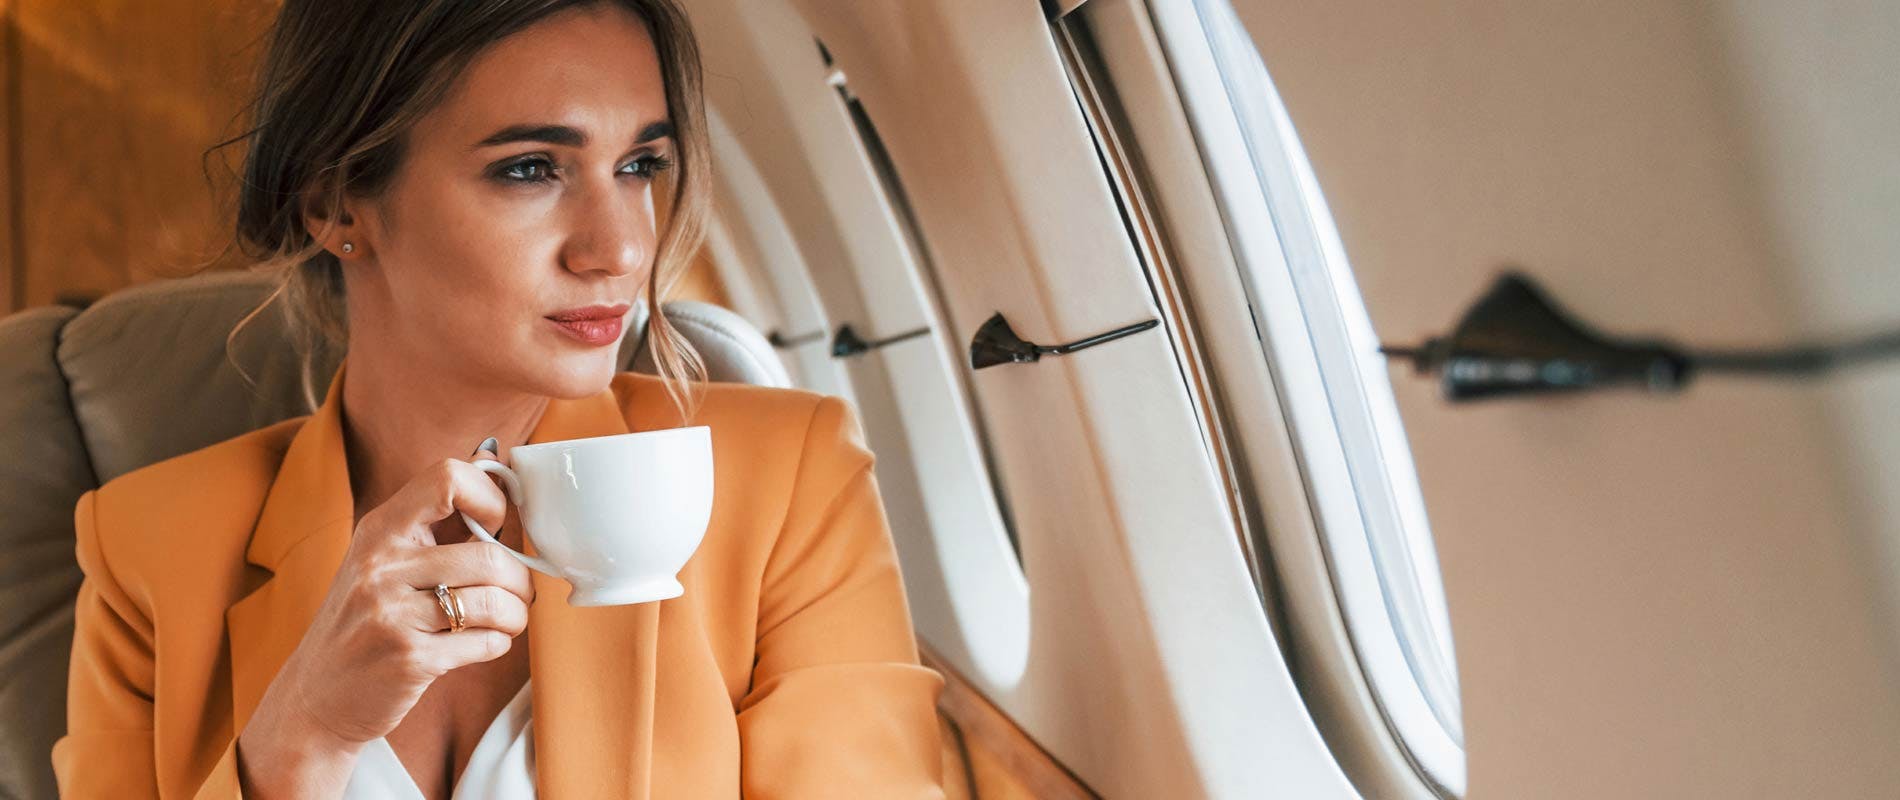 All you have to do on a charter flight is sit back, relax, and enjoy the ride!